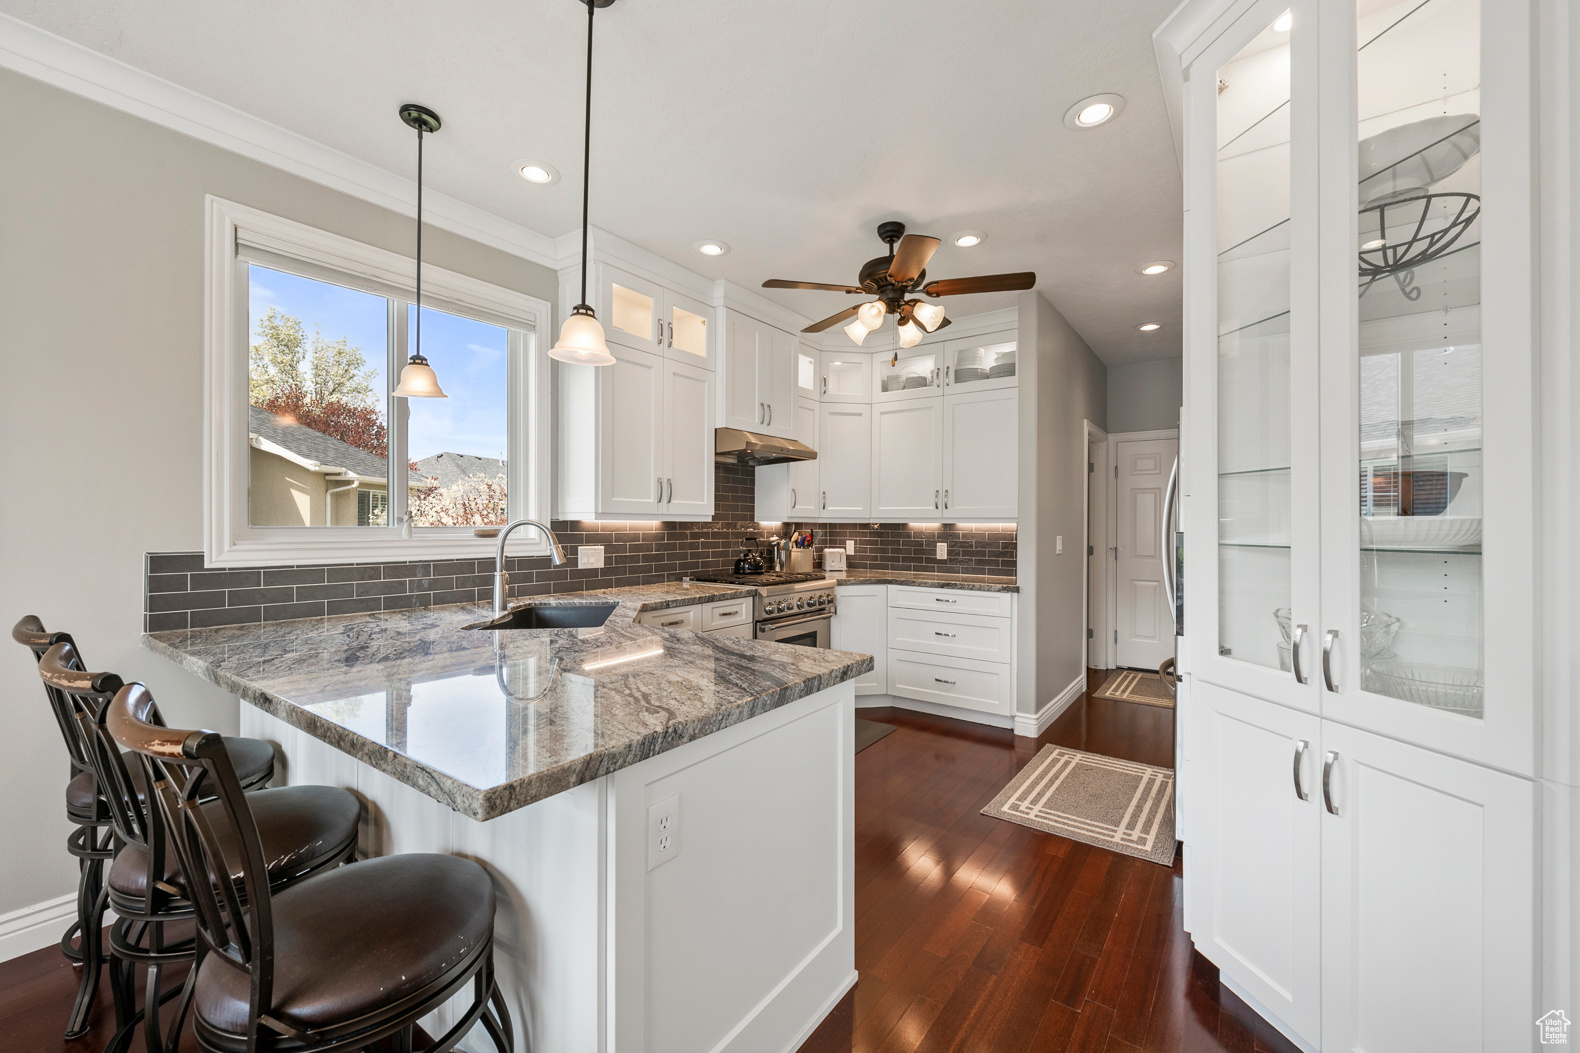 Kitchen featuring ceiling fan, white cabinets, sink, dark wood-type flooring, and kitchen peninsula